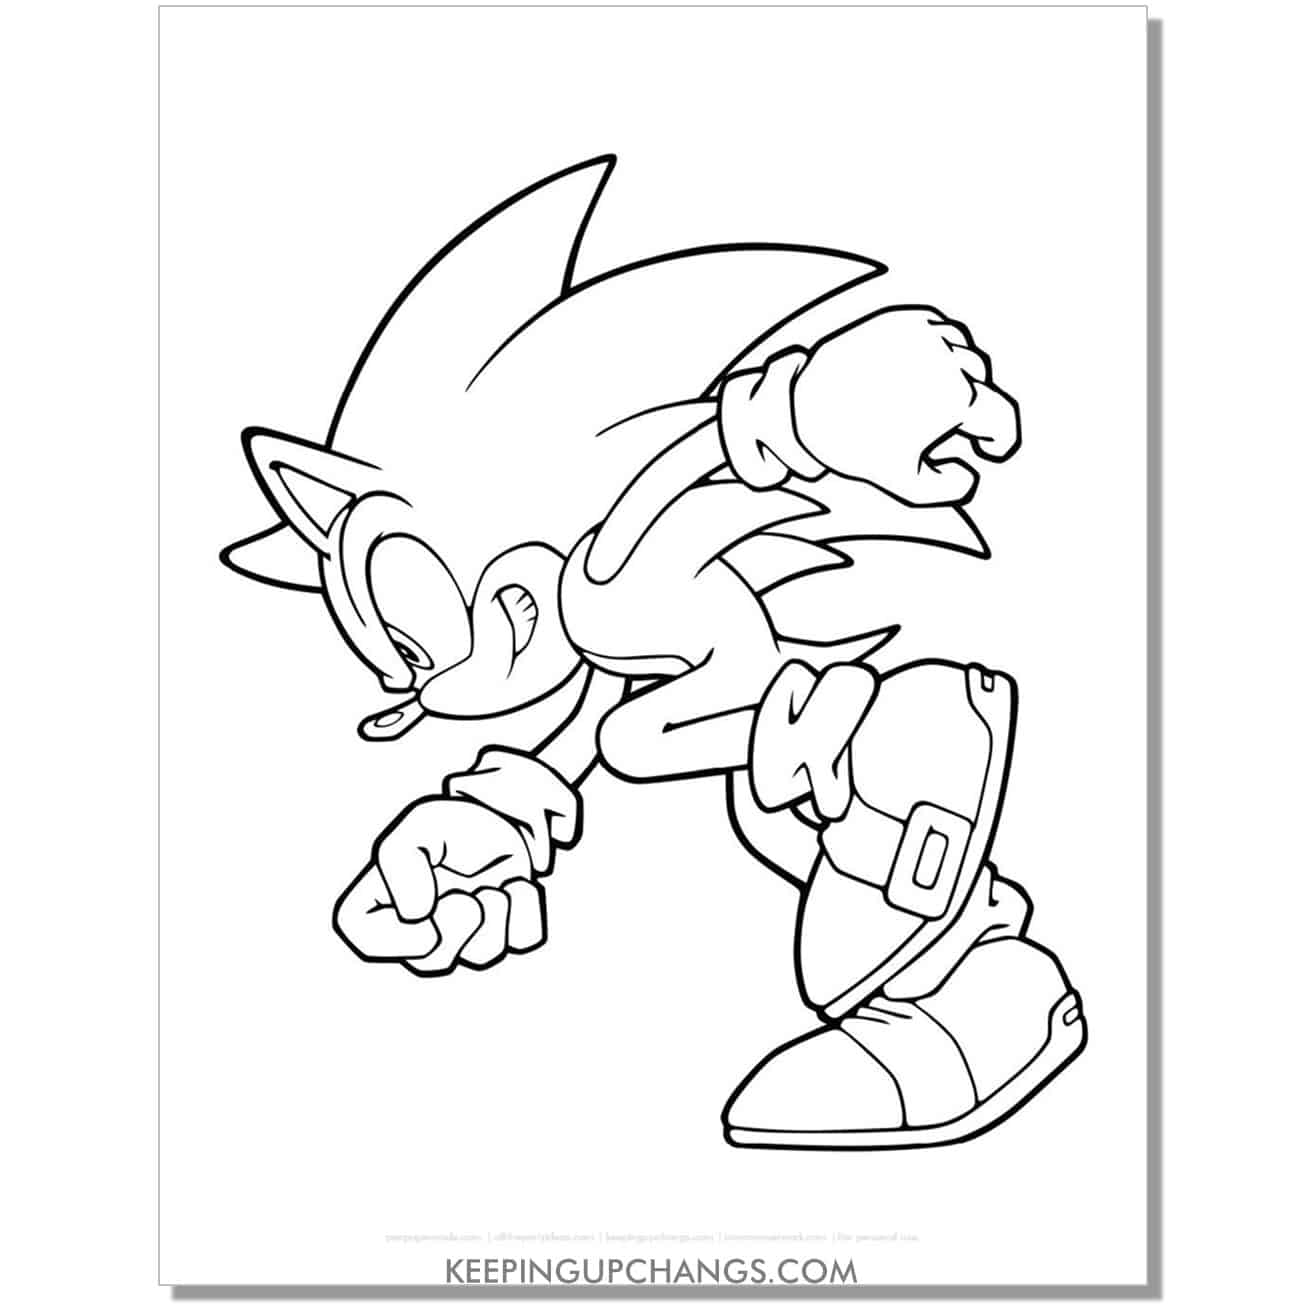 sonic crouching down getting ready to run coloring page.